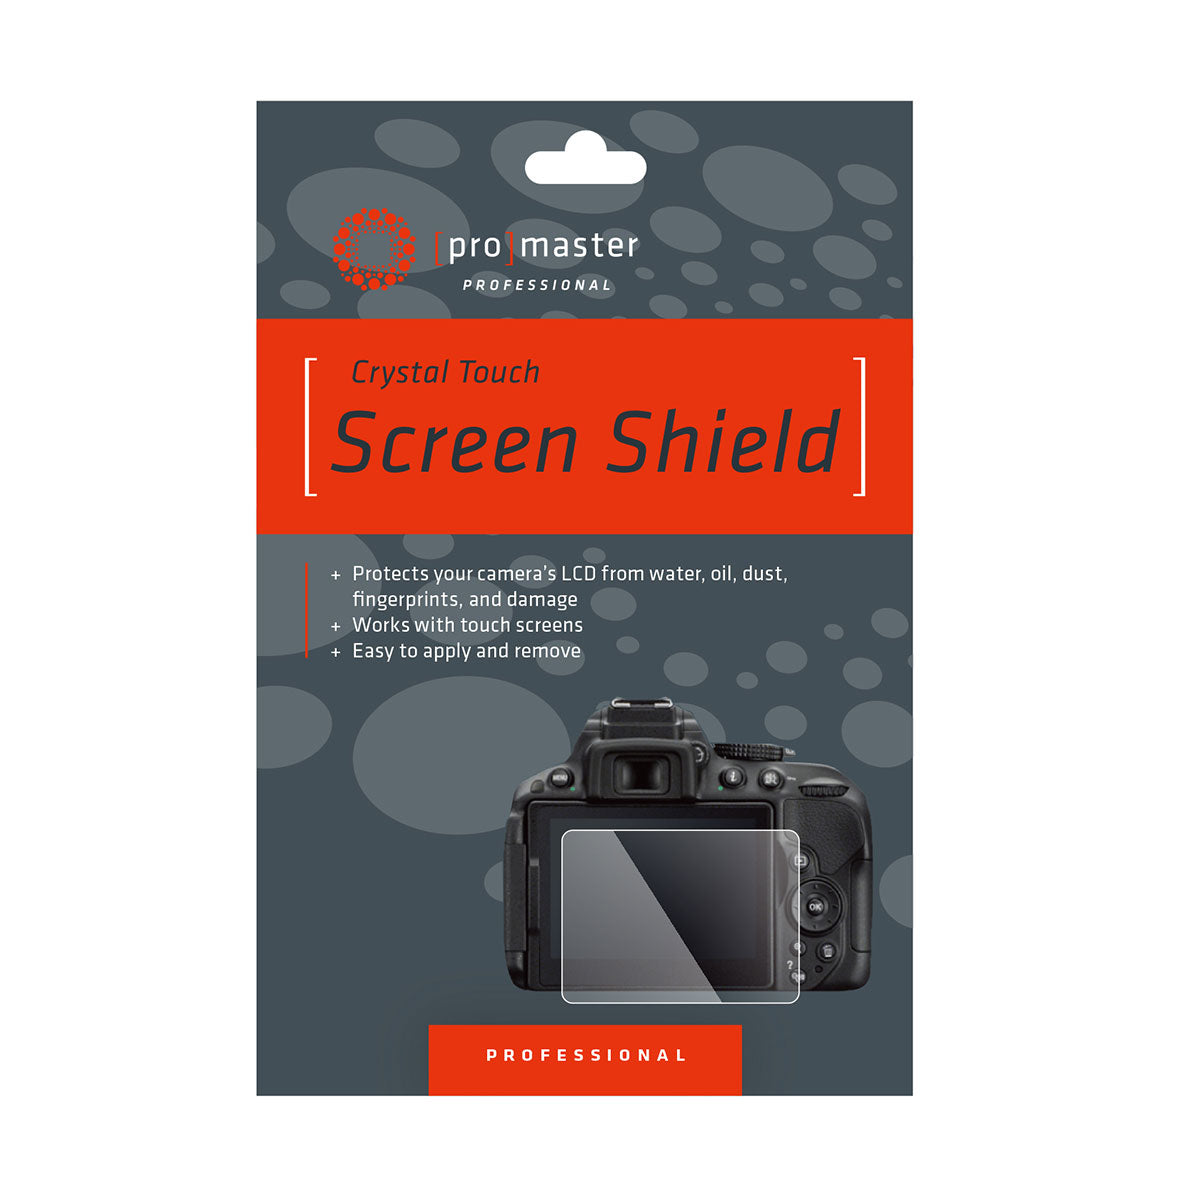 ProMaster Crystal Touch Screen Shield - Canon R6/II, R7